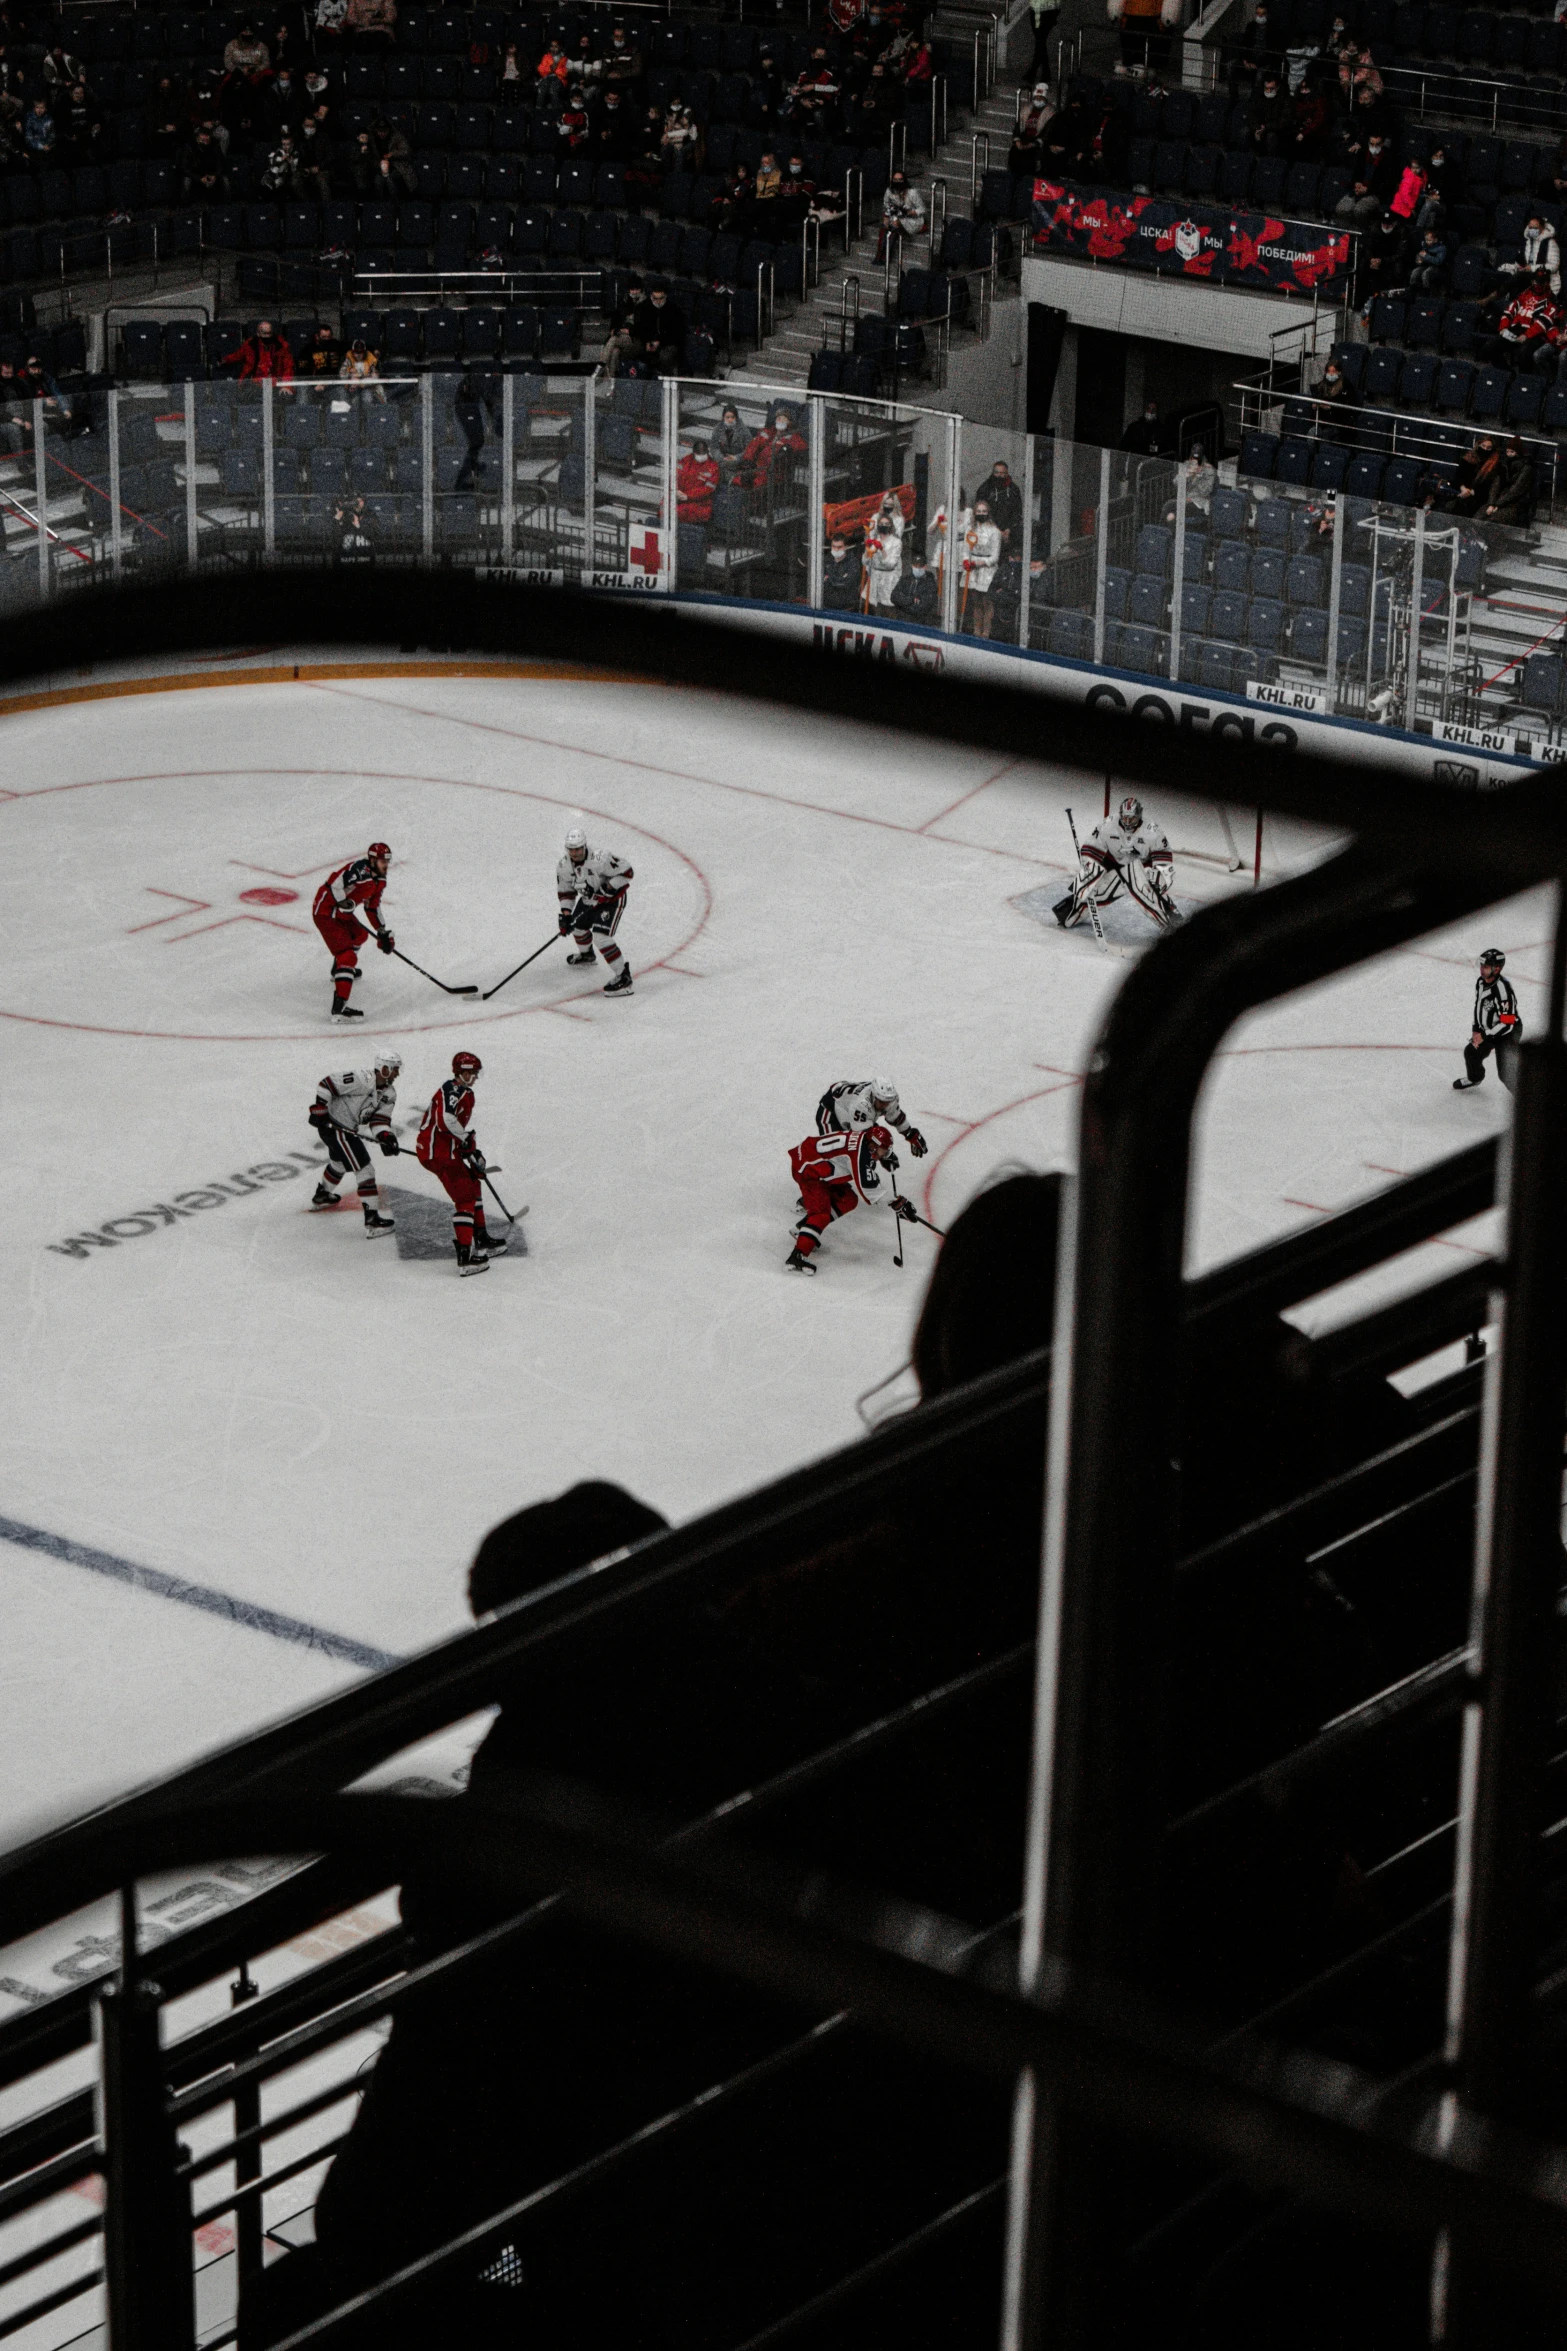 a hockey game being played on a rink